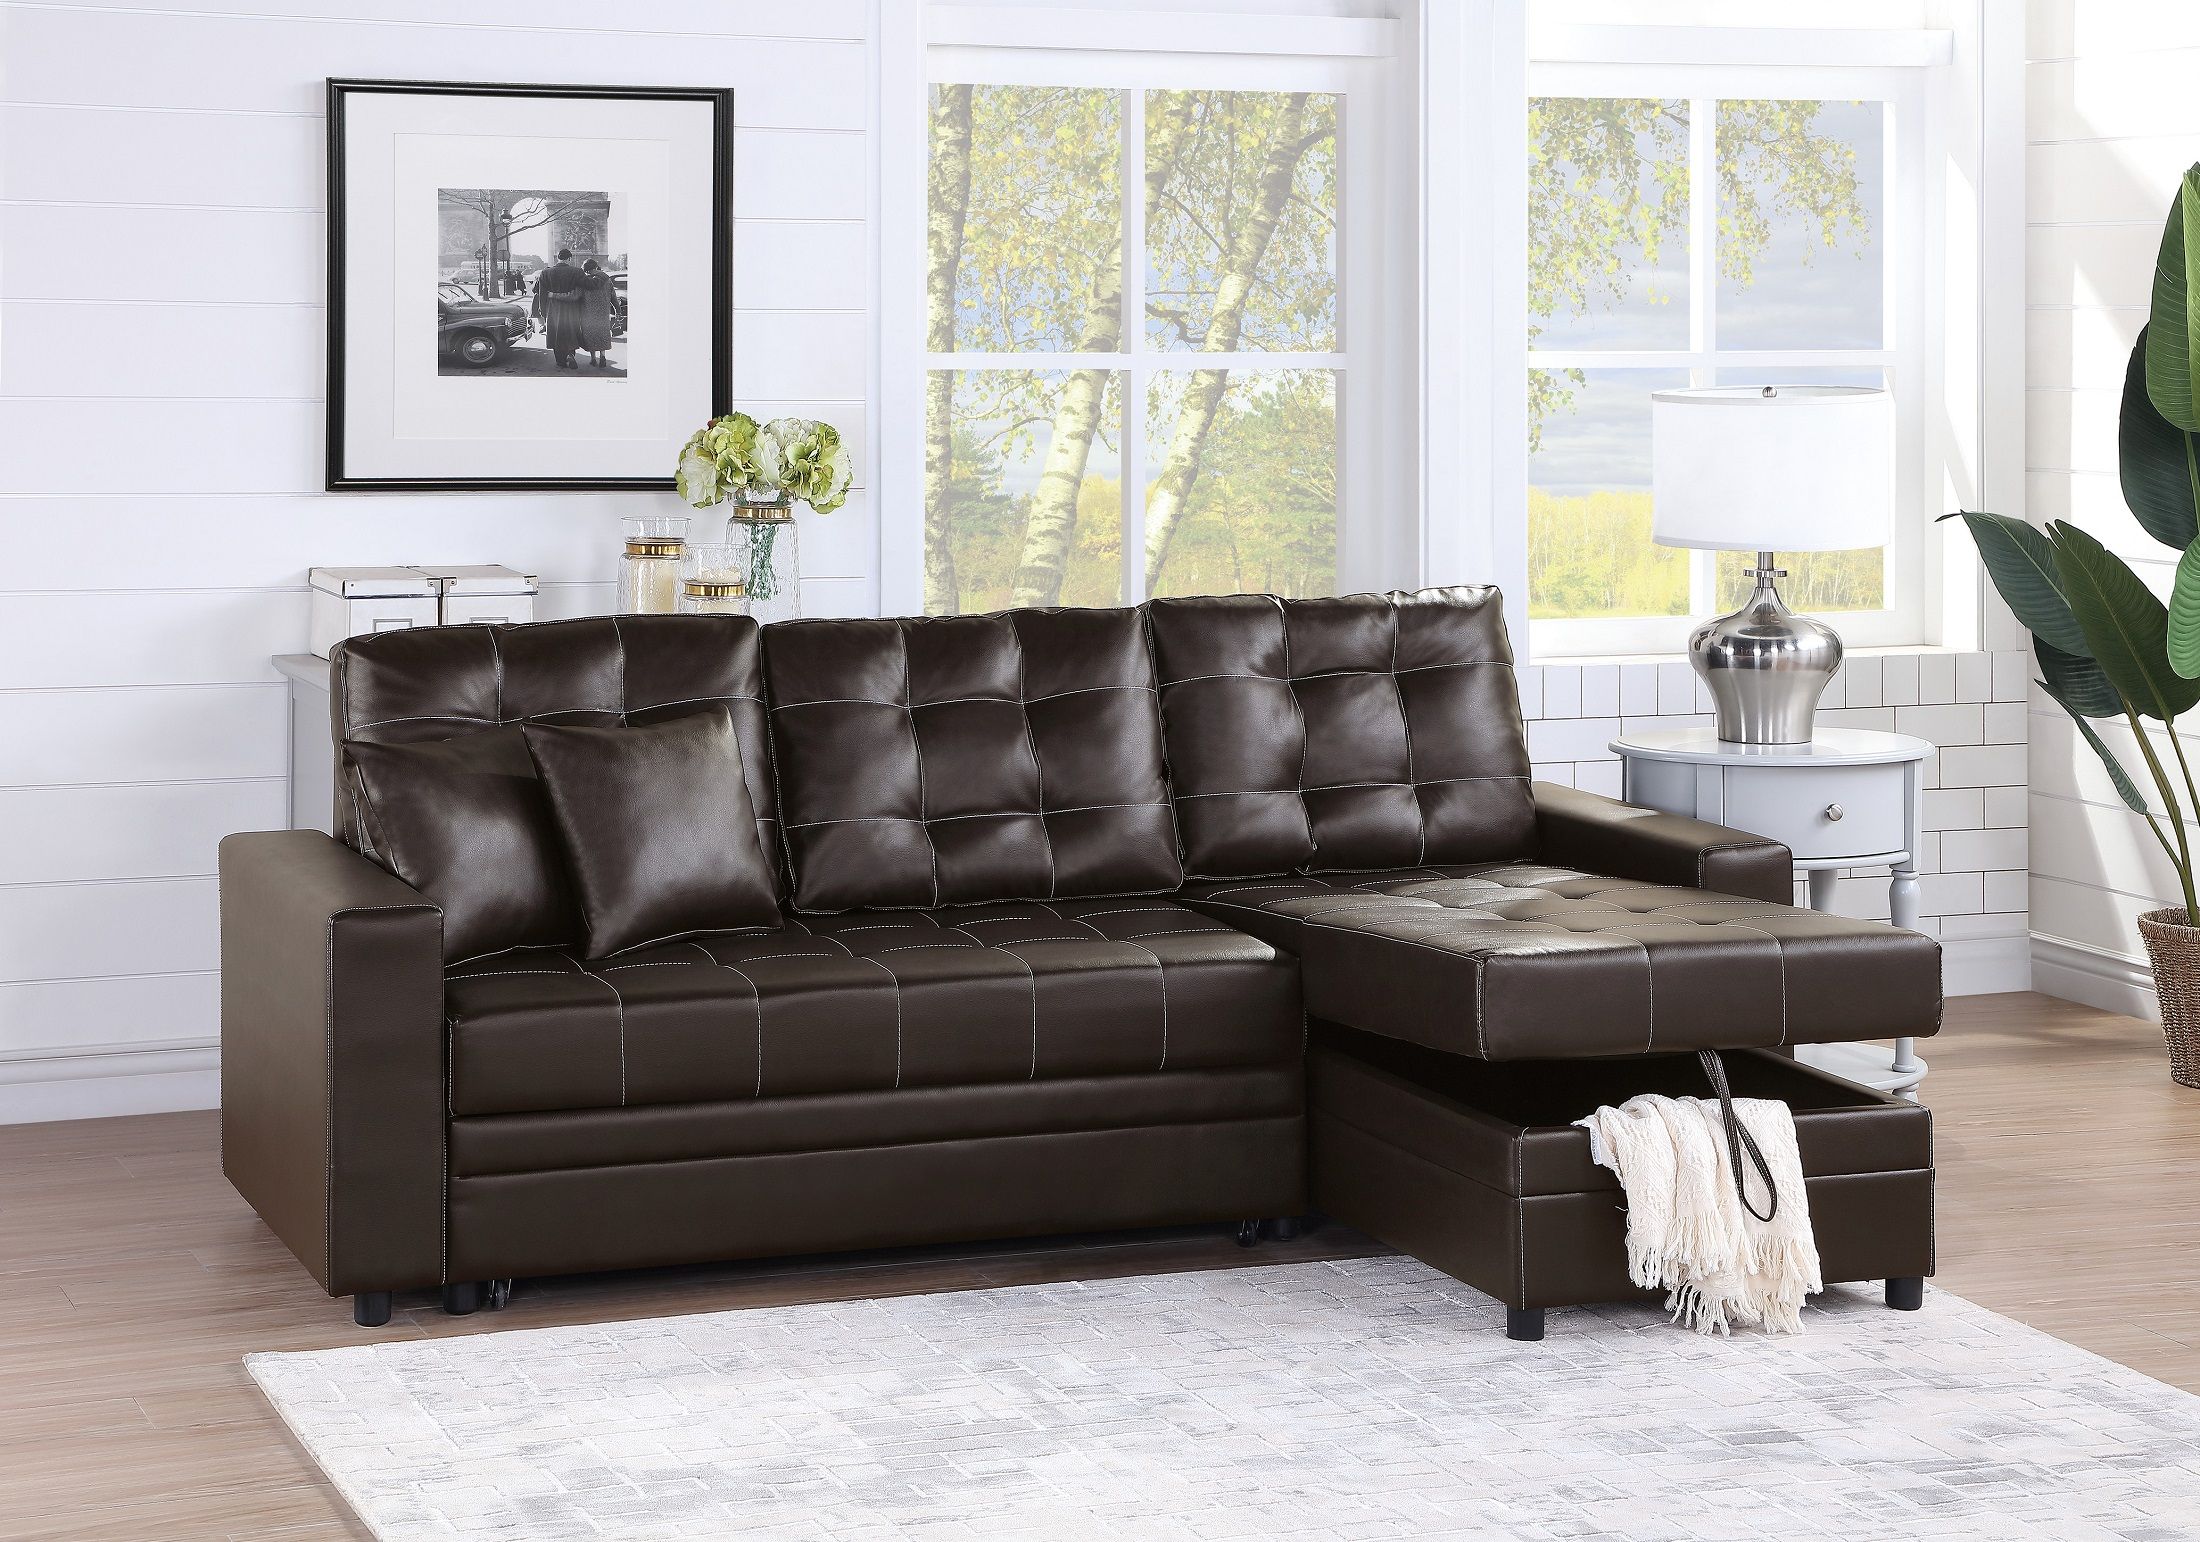 Convertible Sectional Sofa Set Living Room Furniture 2pc Regarding 4pc Crowningshield Contemporary Chaise Sectional Sofas (View 2 of 15)